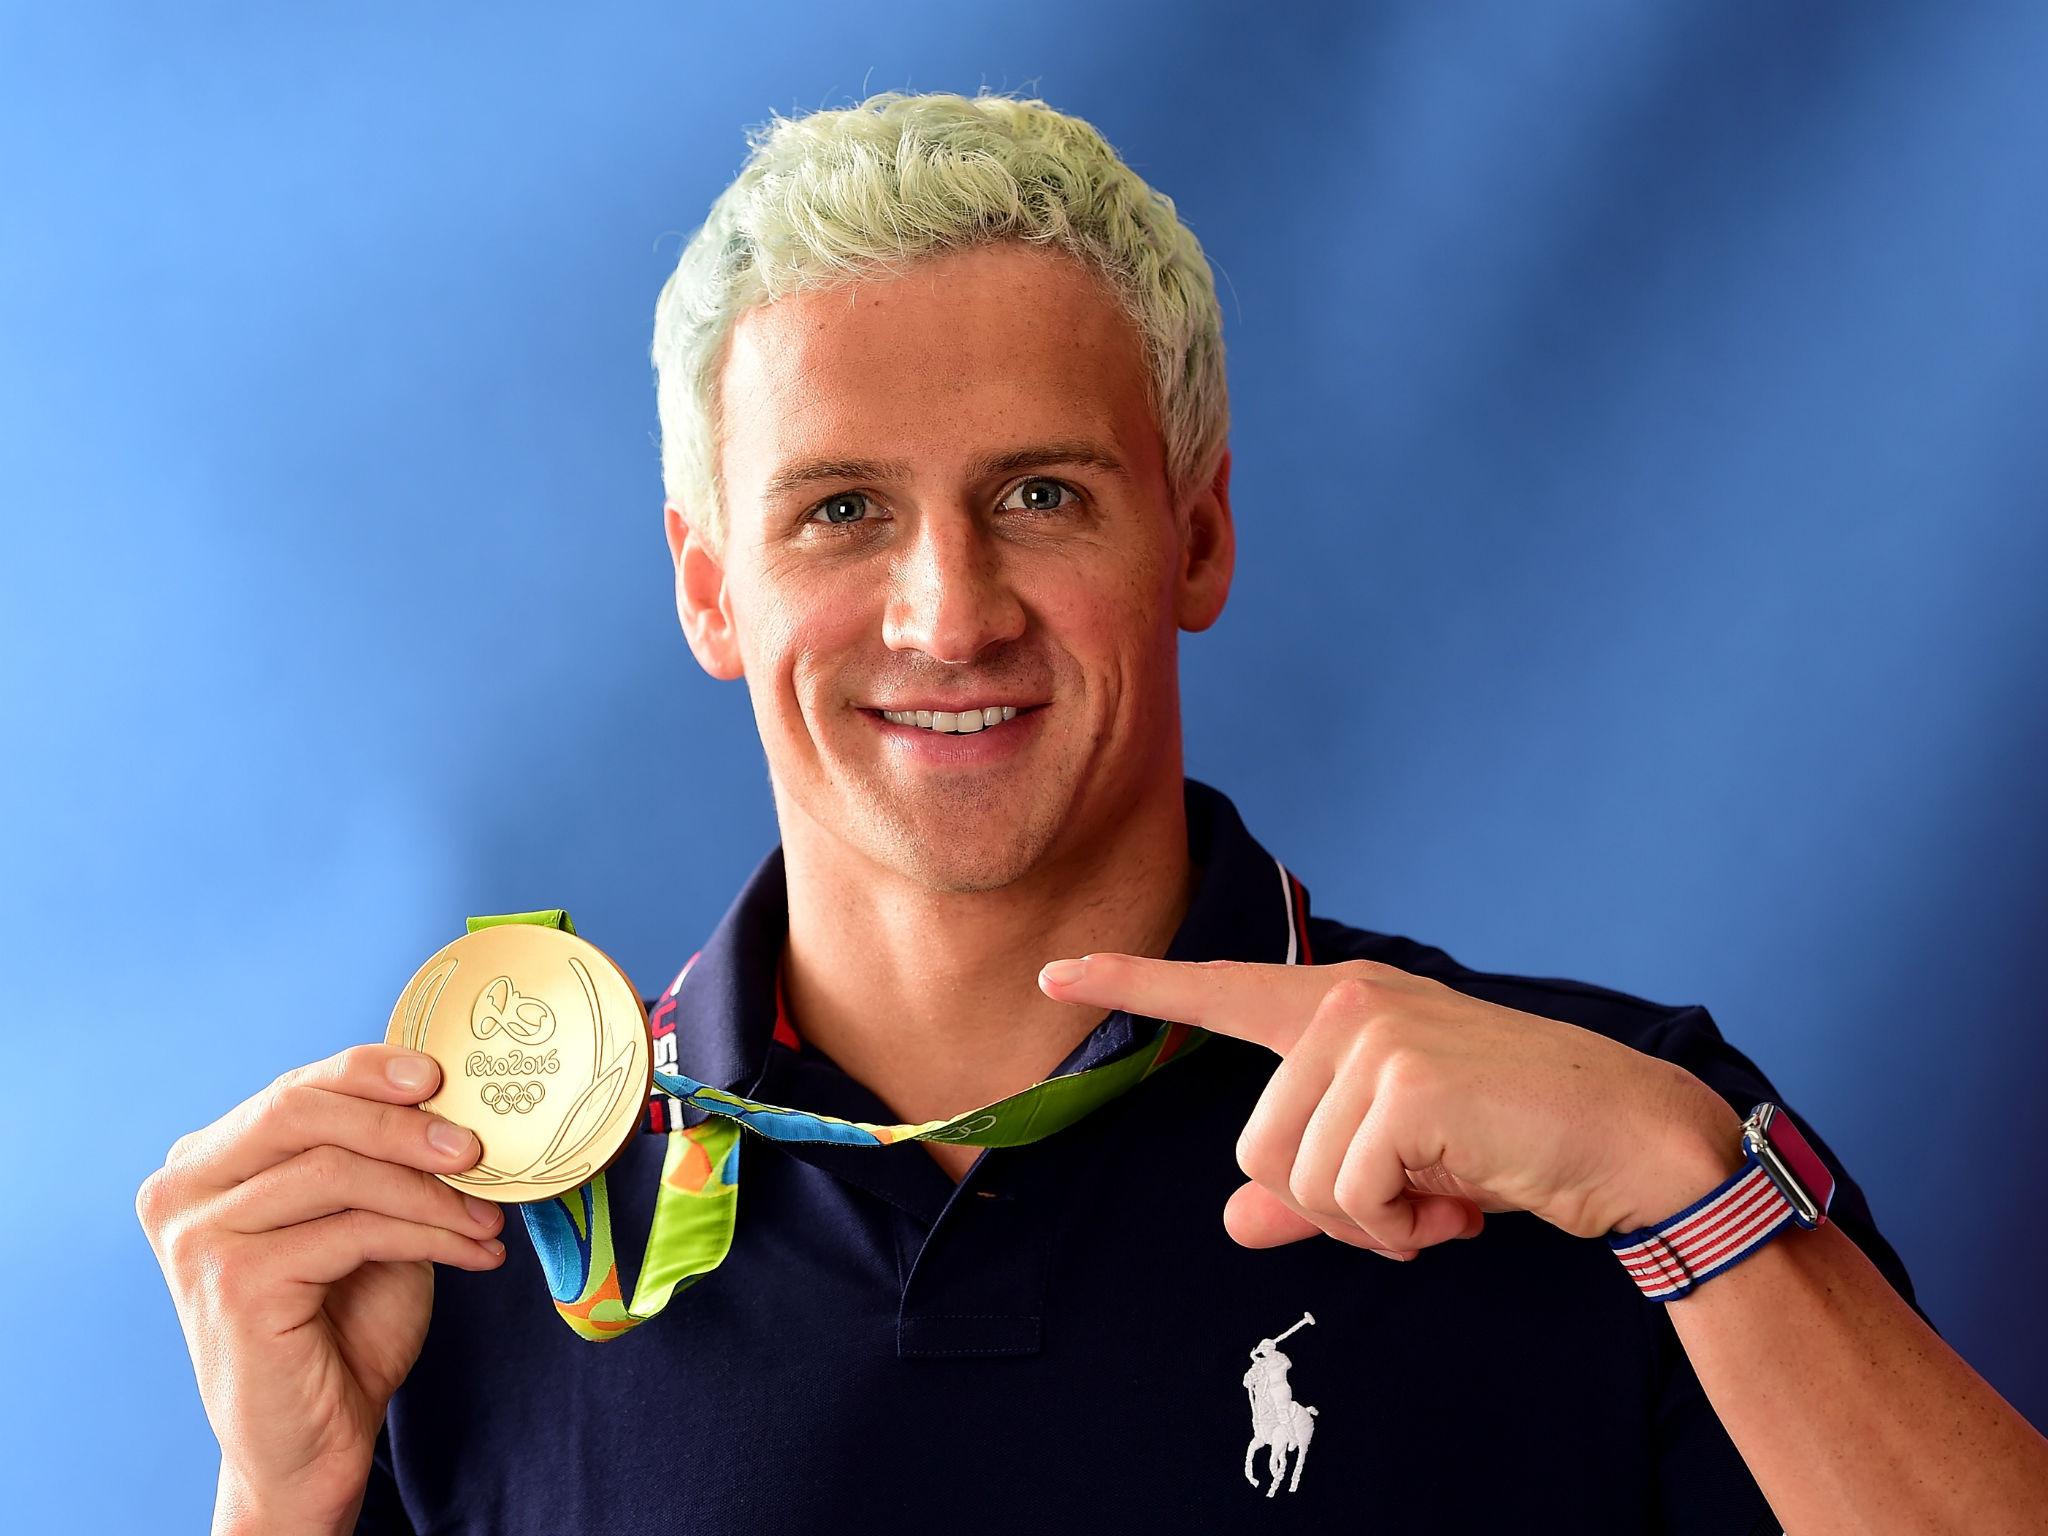 Ryan Lochte and other disgraced US swimmers could be charged for &apos;vandalising toilet and fabricating armed robbery&apos;